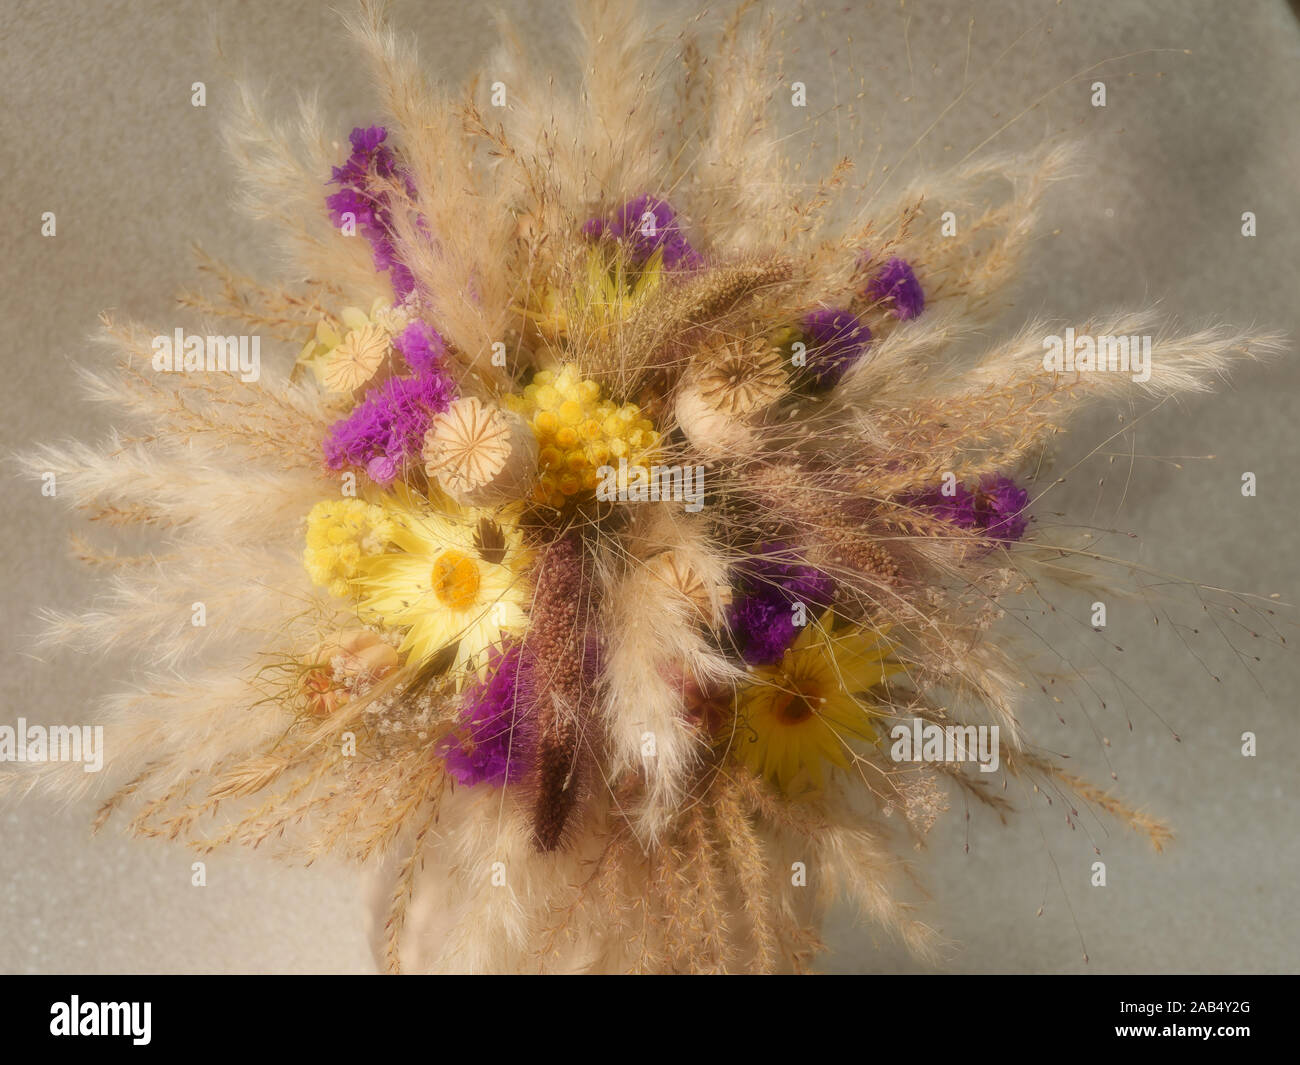 Dried flower and grass arrangement yellow and purple Stock Photo